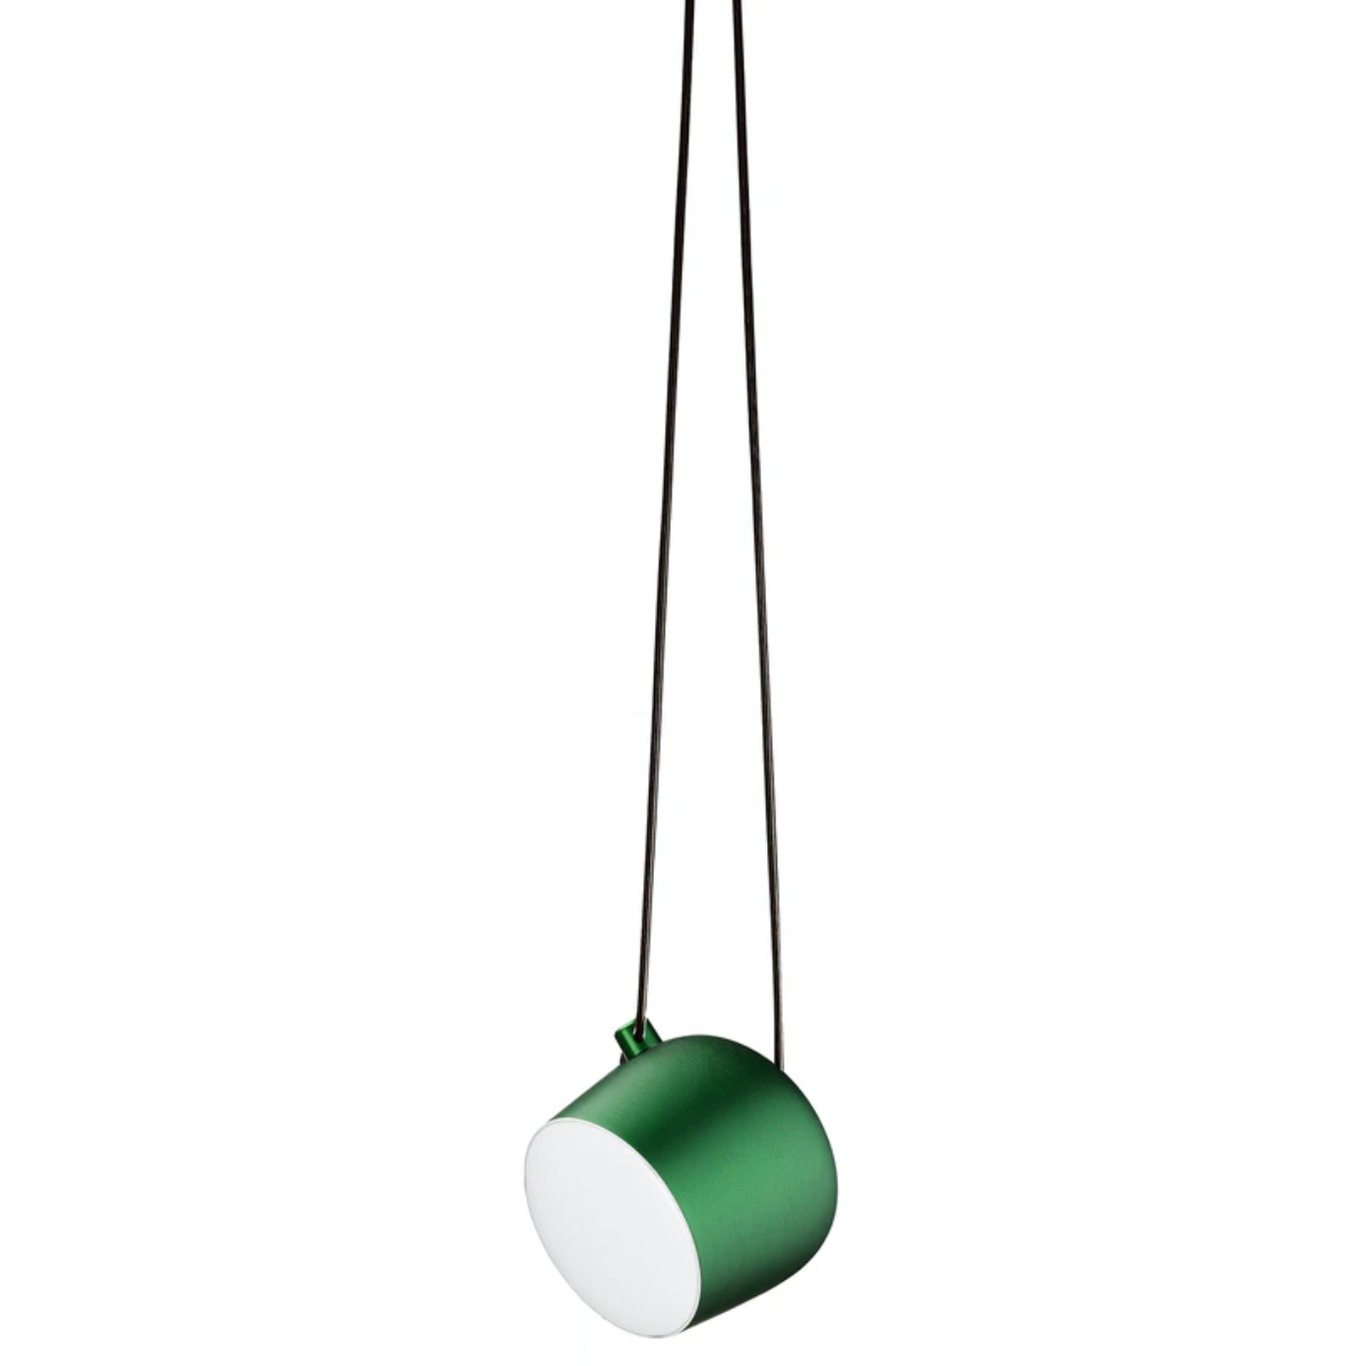 Aim Small Hanglamp, Ivy Anodized